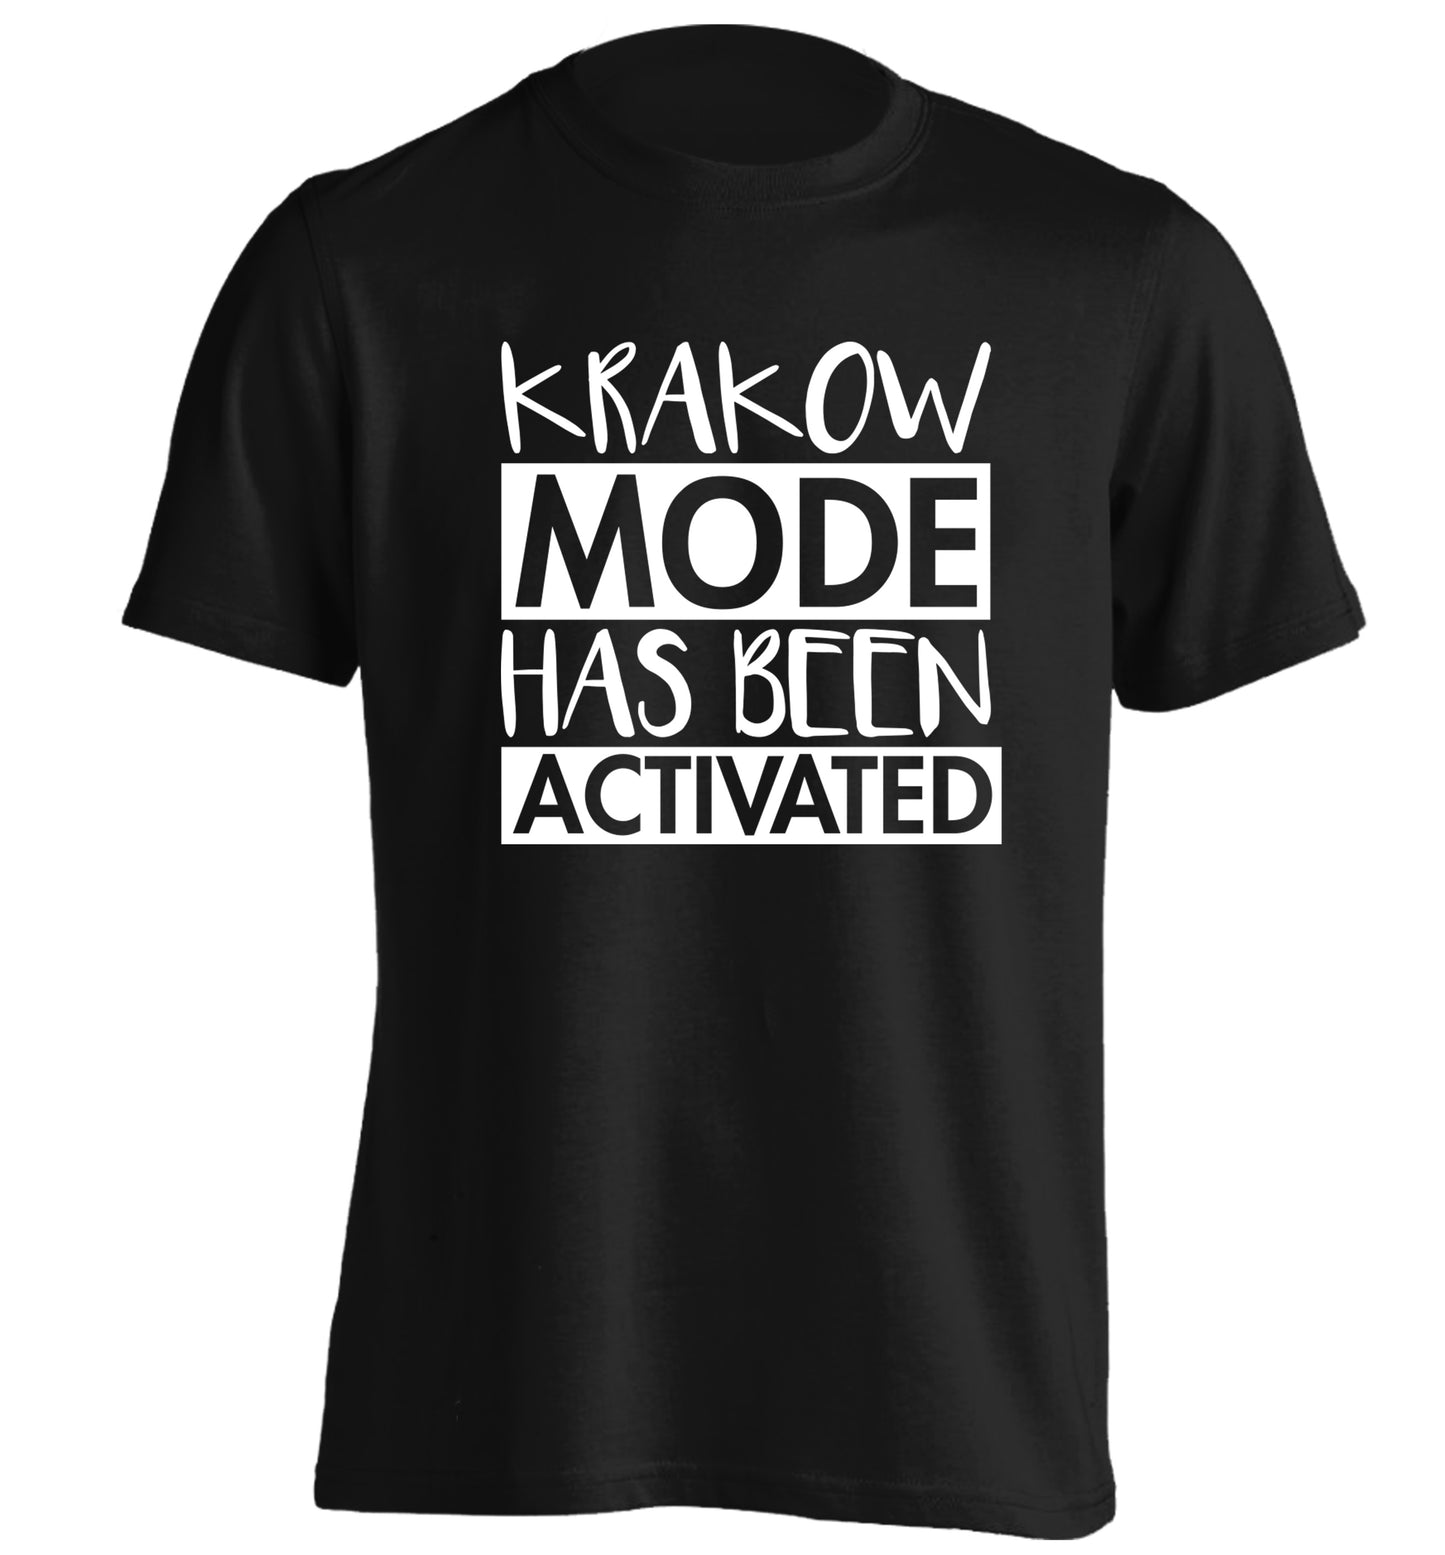 Krakow mode has been activated adults unisex black Tshirt 2XL